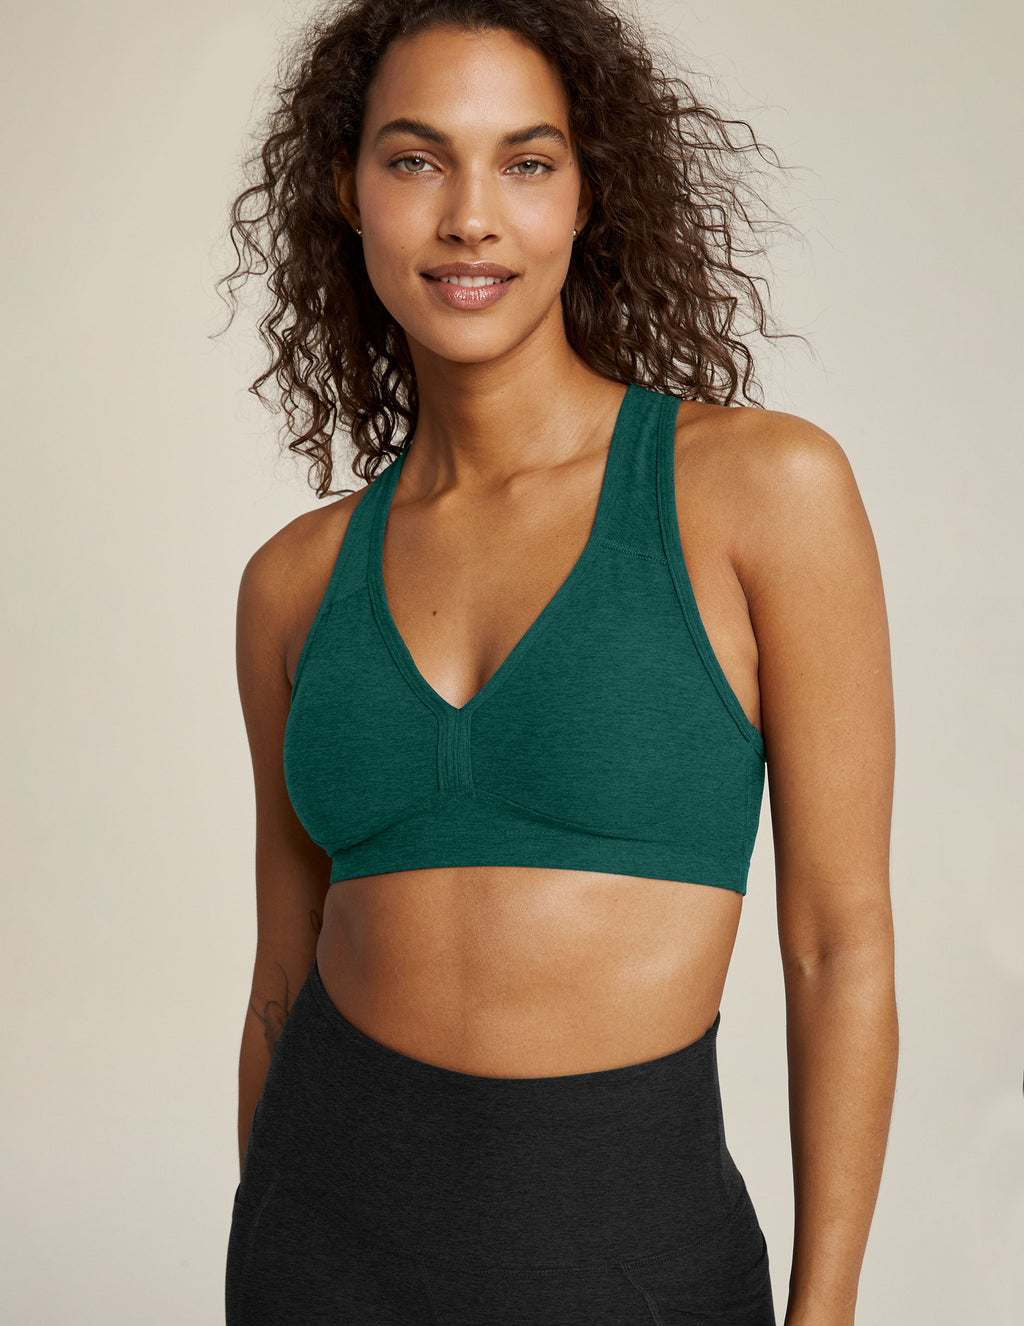 Spacedye Lift Your Spirits Bra Featured Image